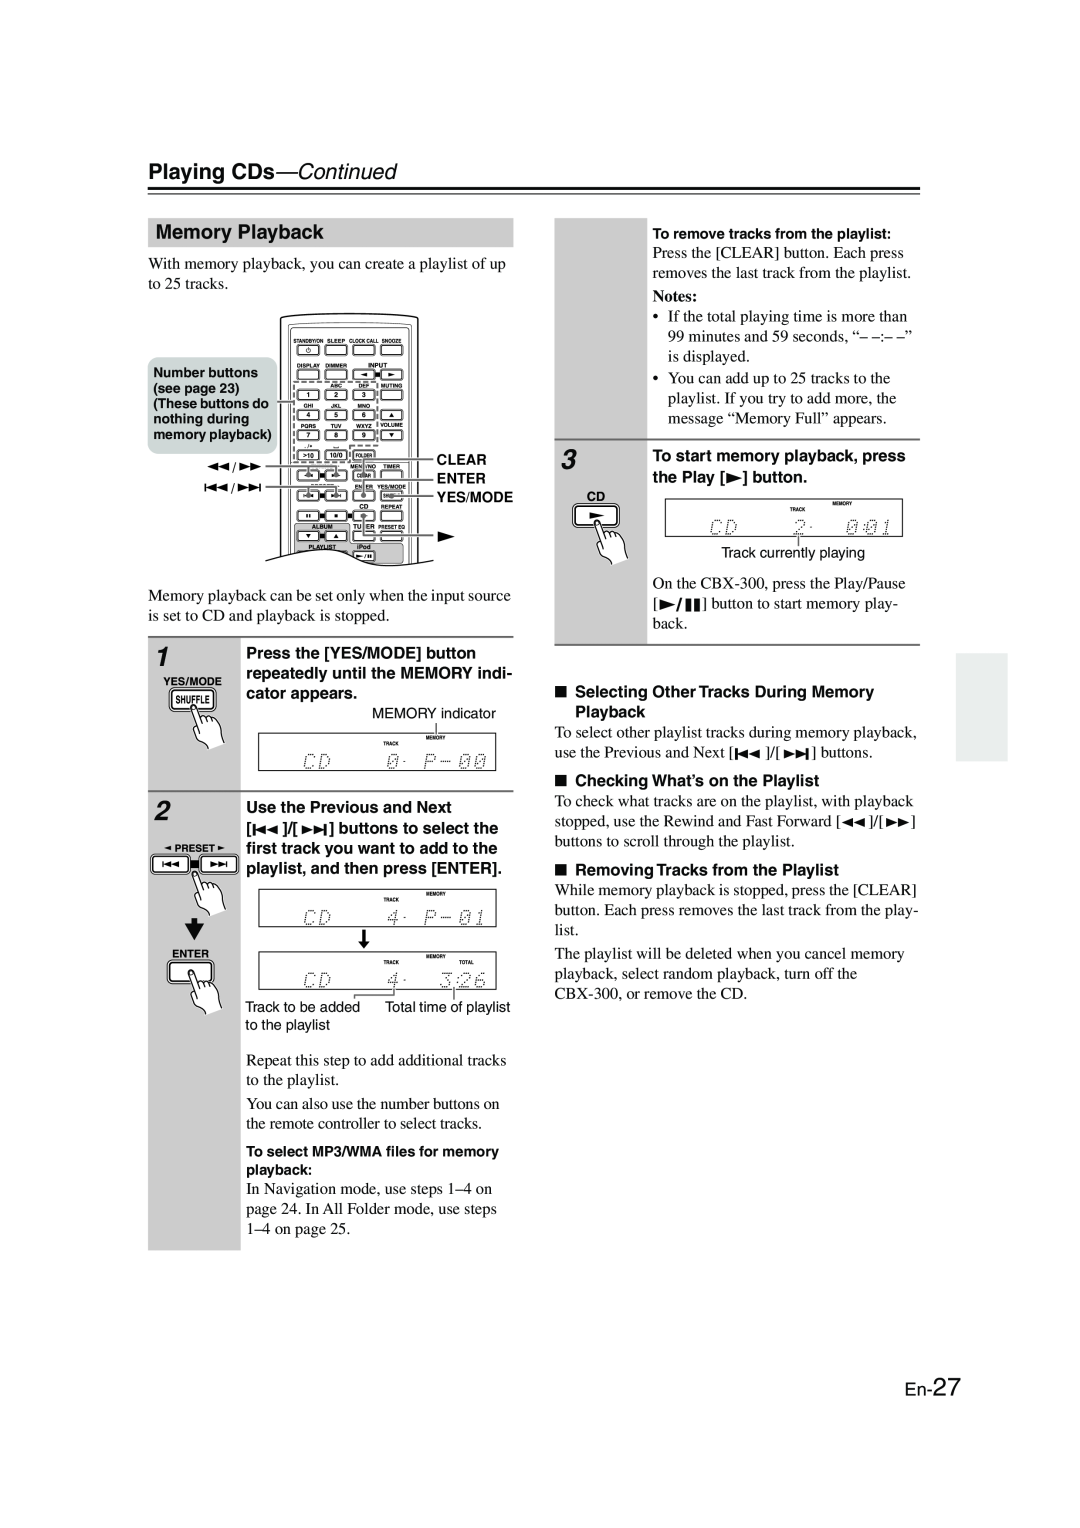 Onkyo CBX-300 instruction manual Memory Playback, En-27, Playing CDs—Continued, Notes 